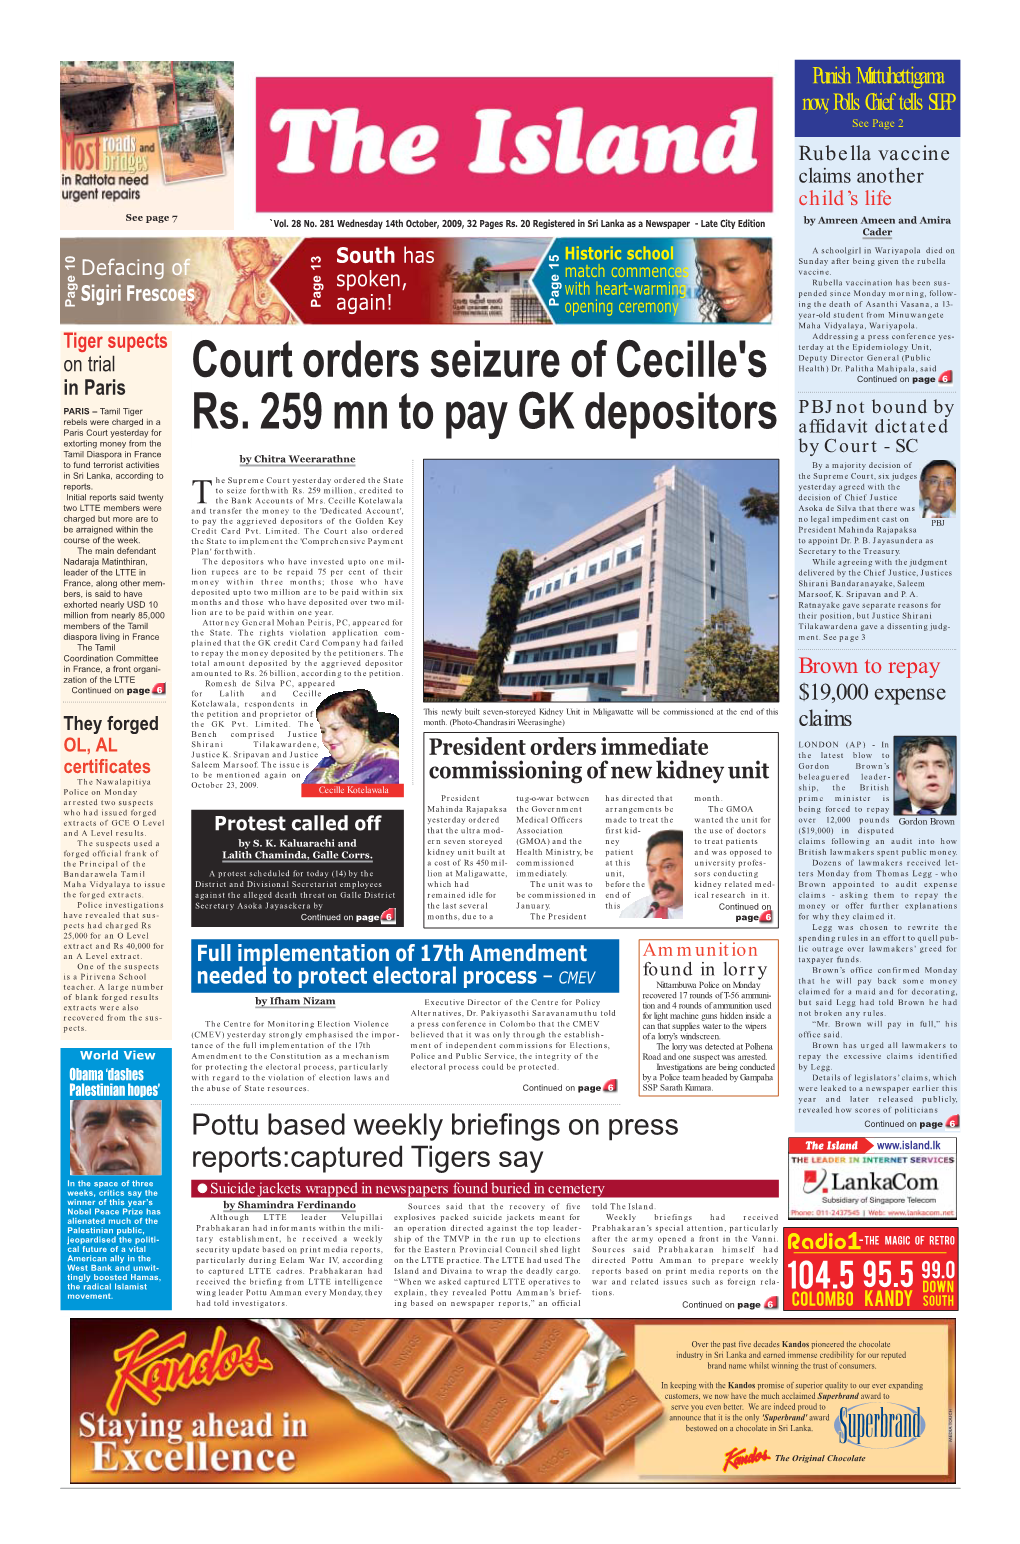 Court Orders Seizure of Cecille's Rs. 259 Mn to Pay GK Depositors